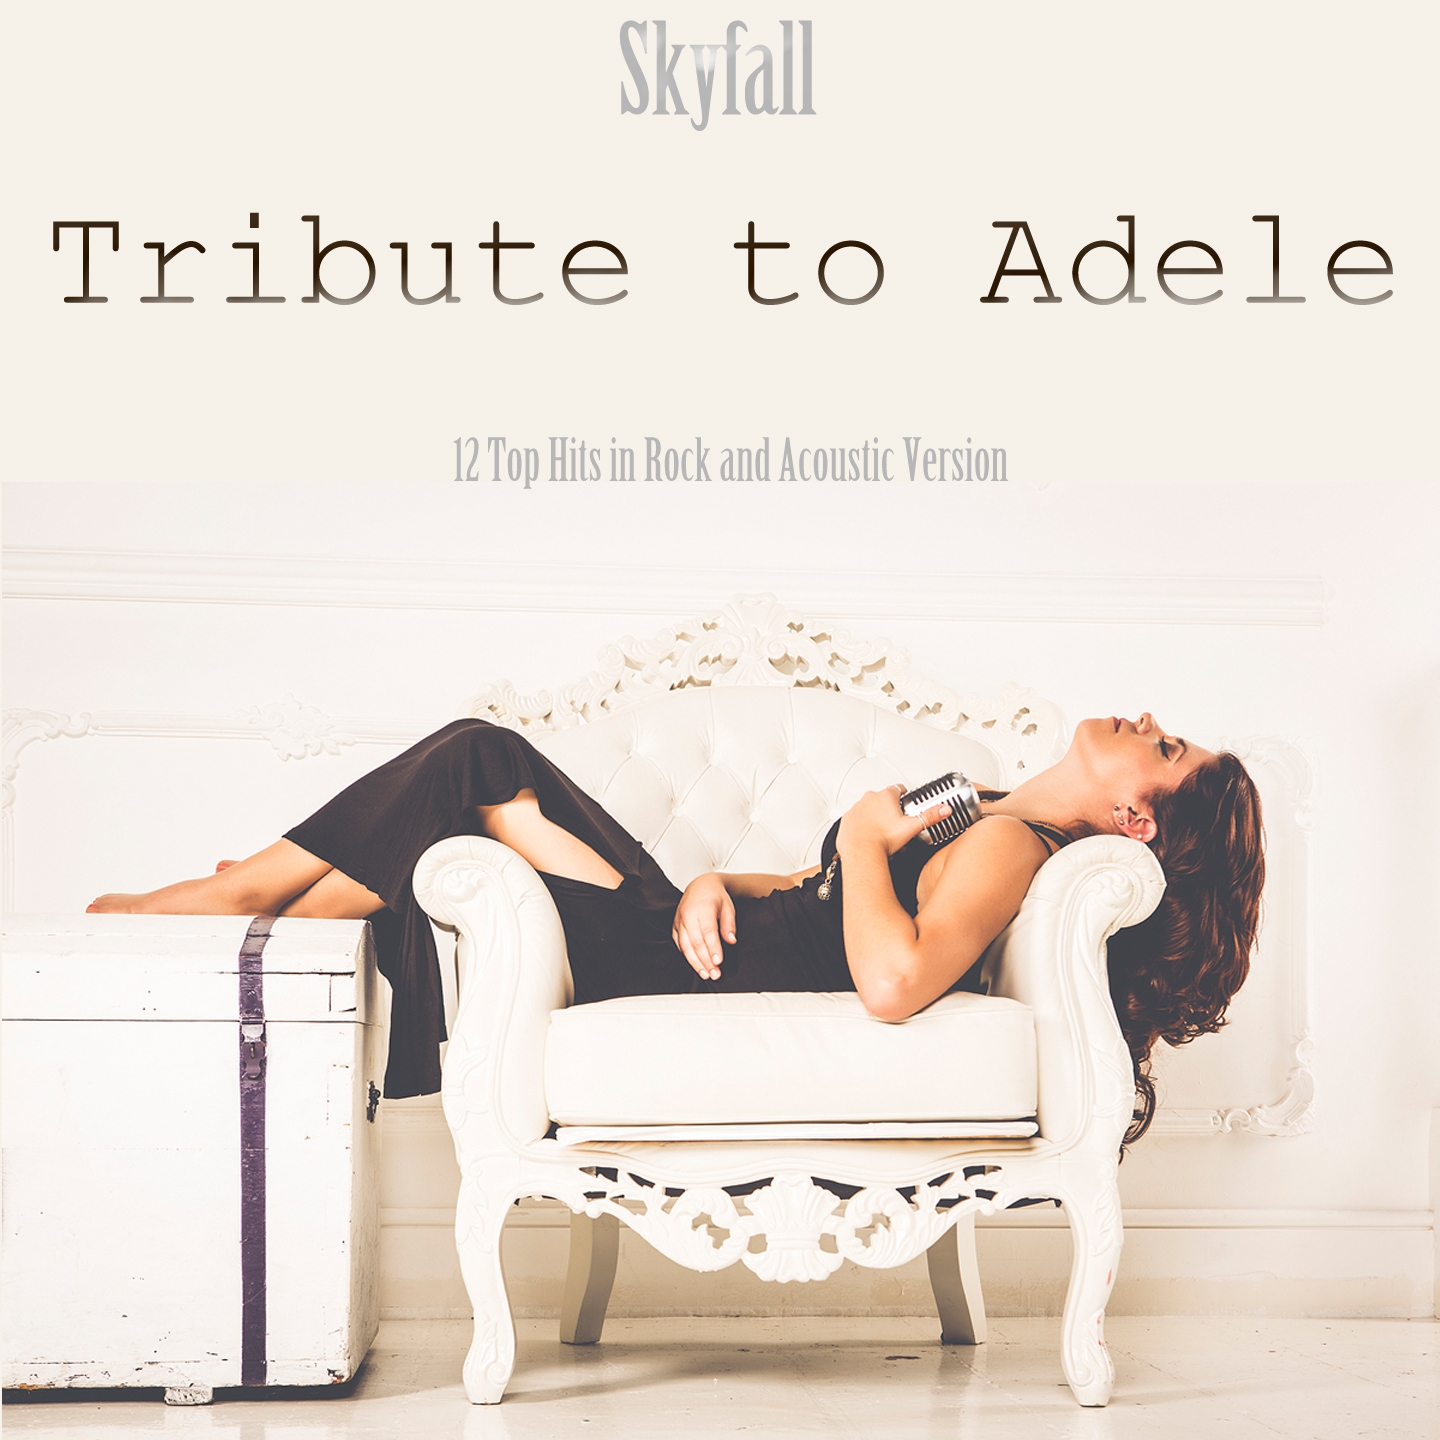 Tribute to Adele (12 Top Hits in Rock and Acoustic Version)